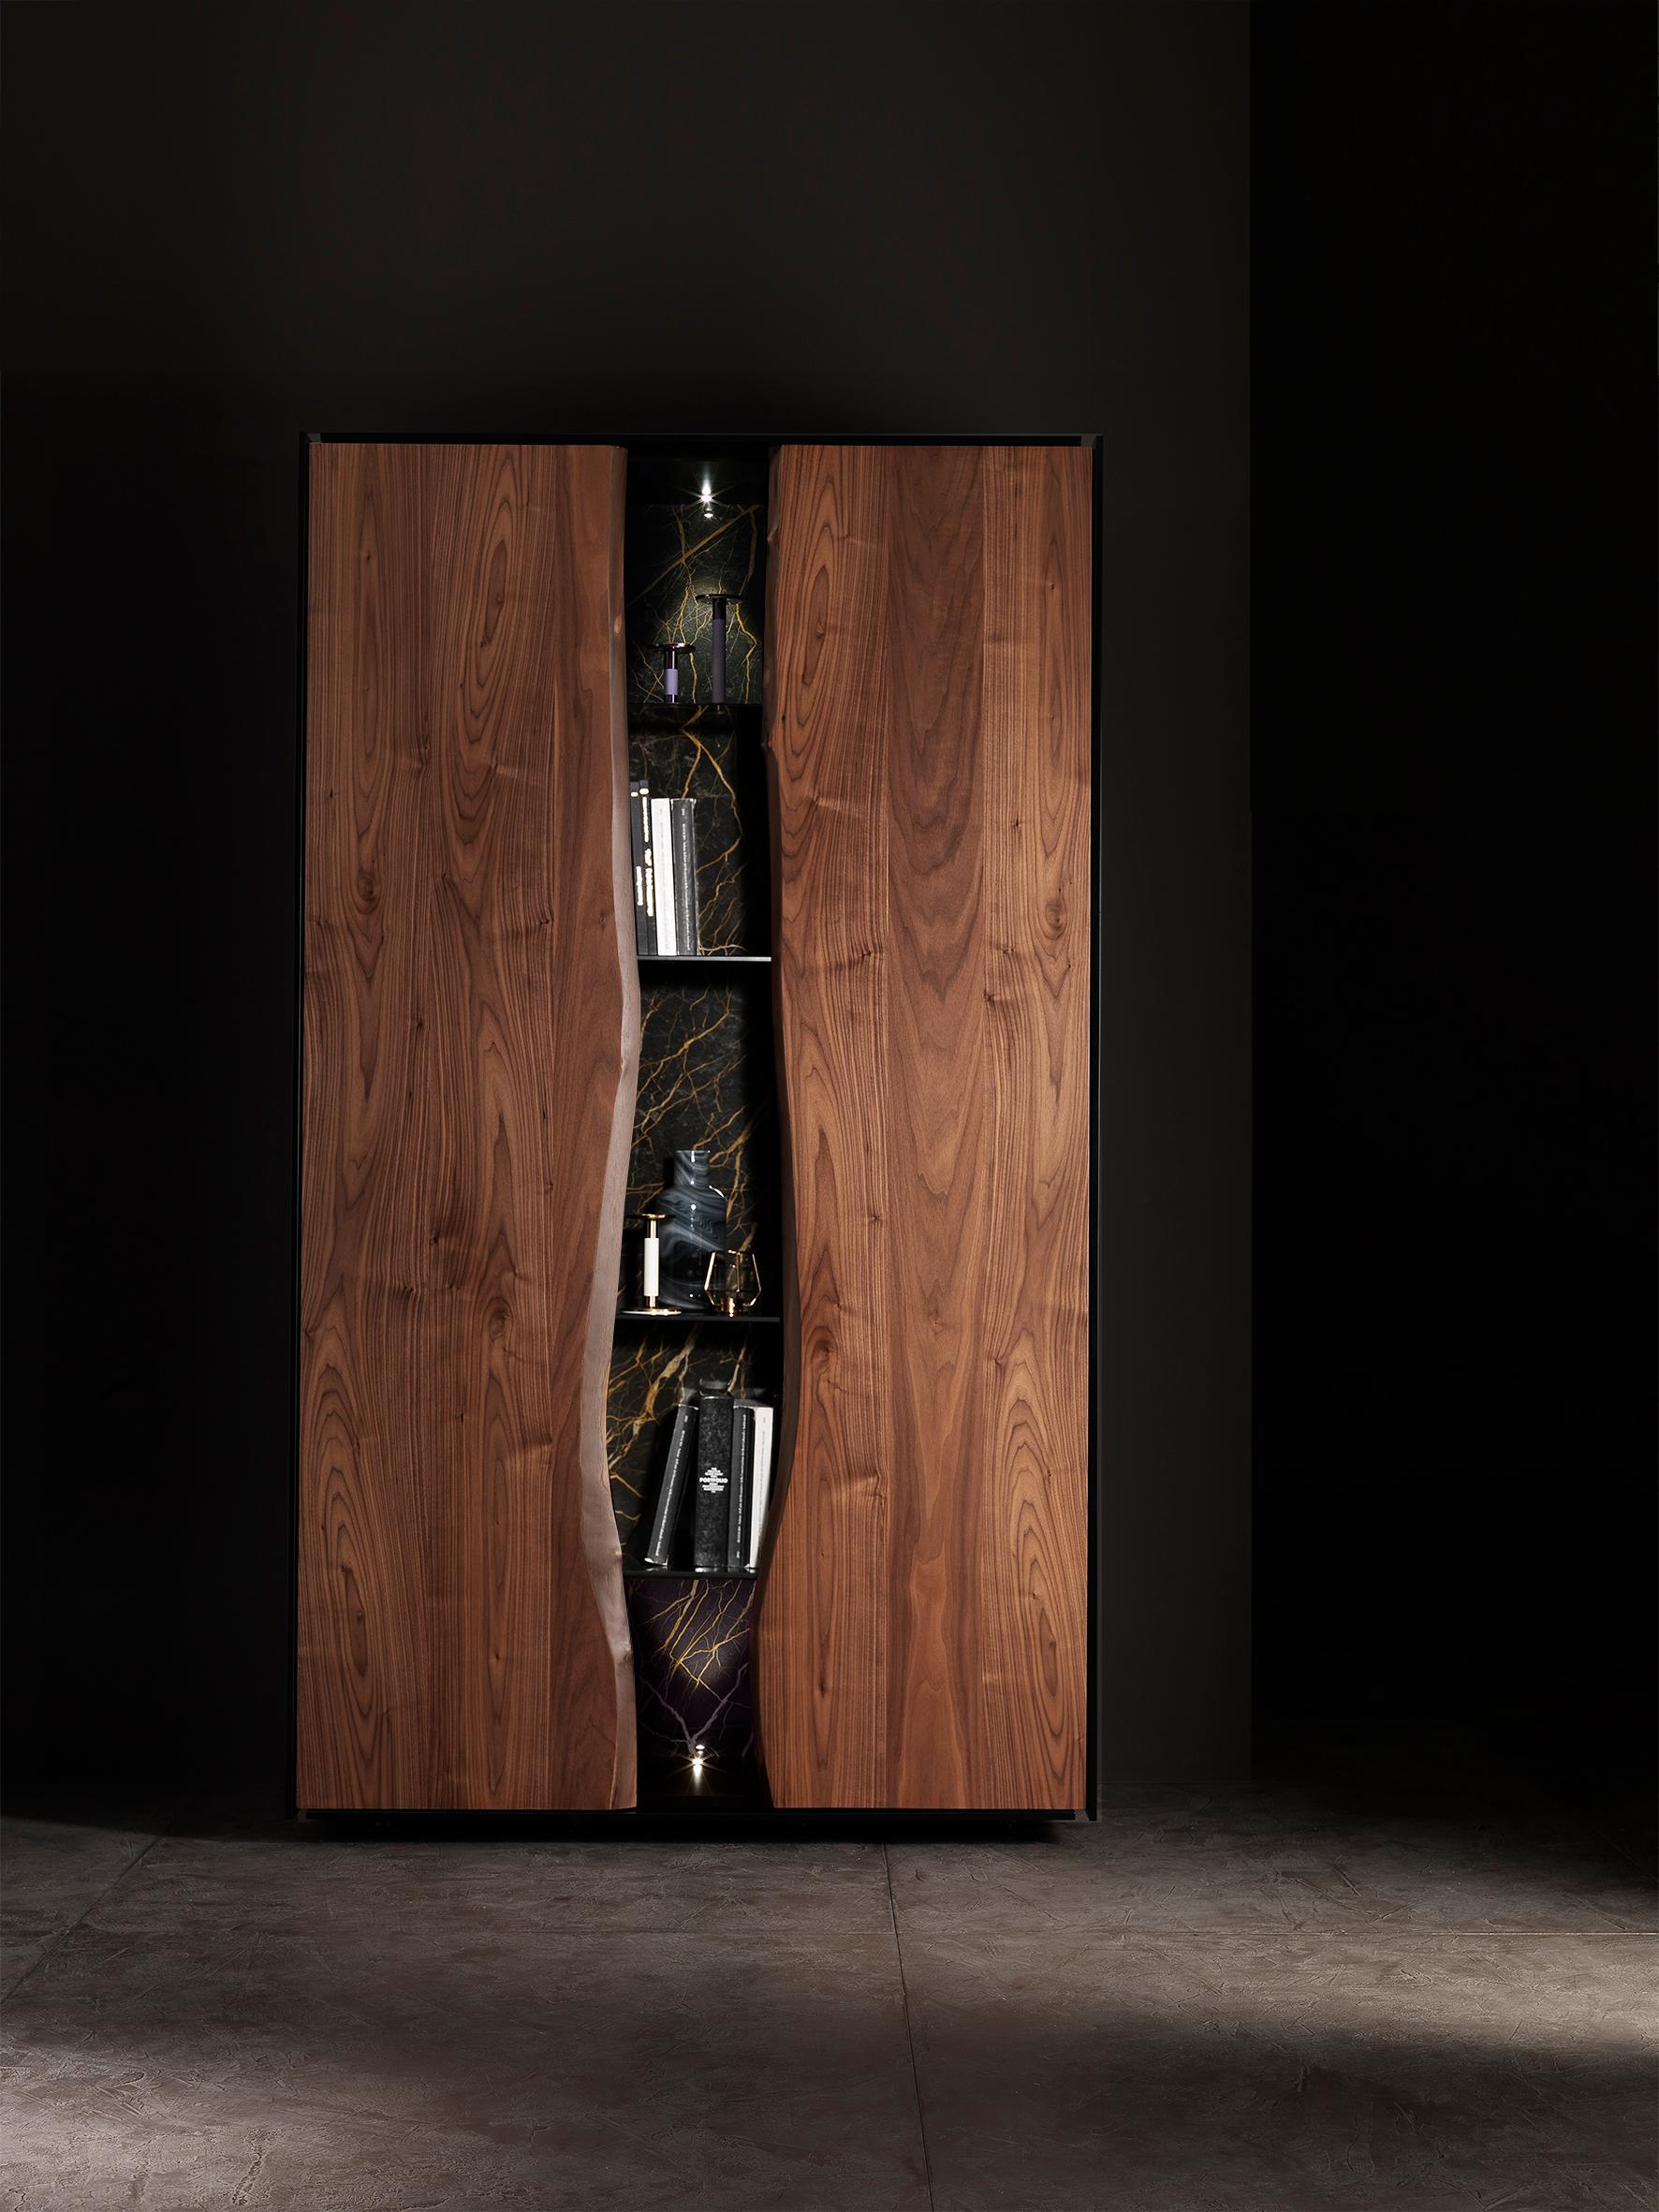 Think Twice Cabinet by Francesco Profili
Dimensions: W 135 x D 60 x H 235 cm 
Materials: Walnut, Noir Saint Laurent Marble, Glass Shelves, Matt Lacquered.

The detail-rich cabinet inherits the lines of the collection, developing them in the vertical